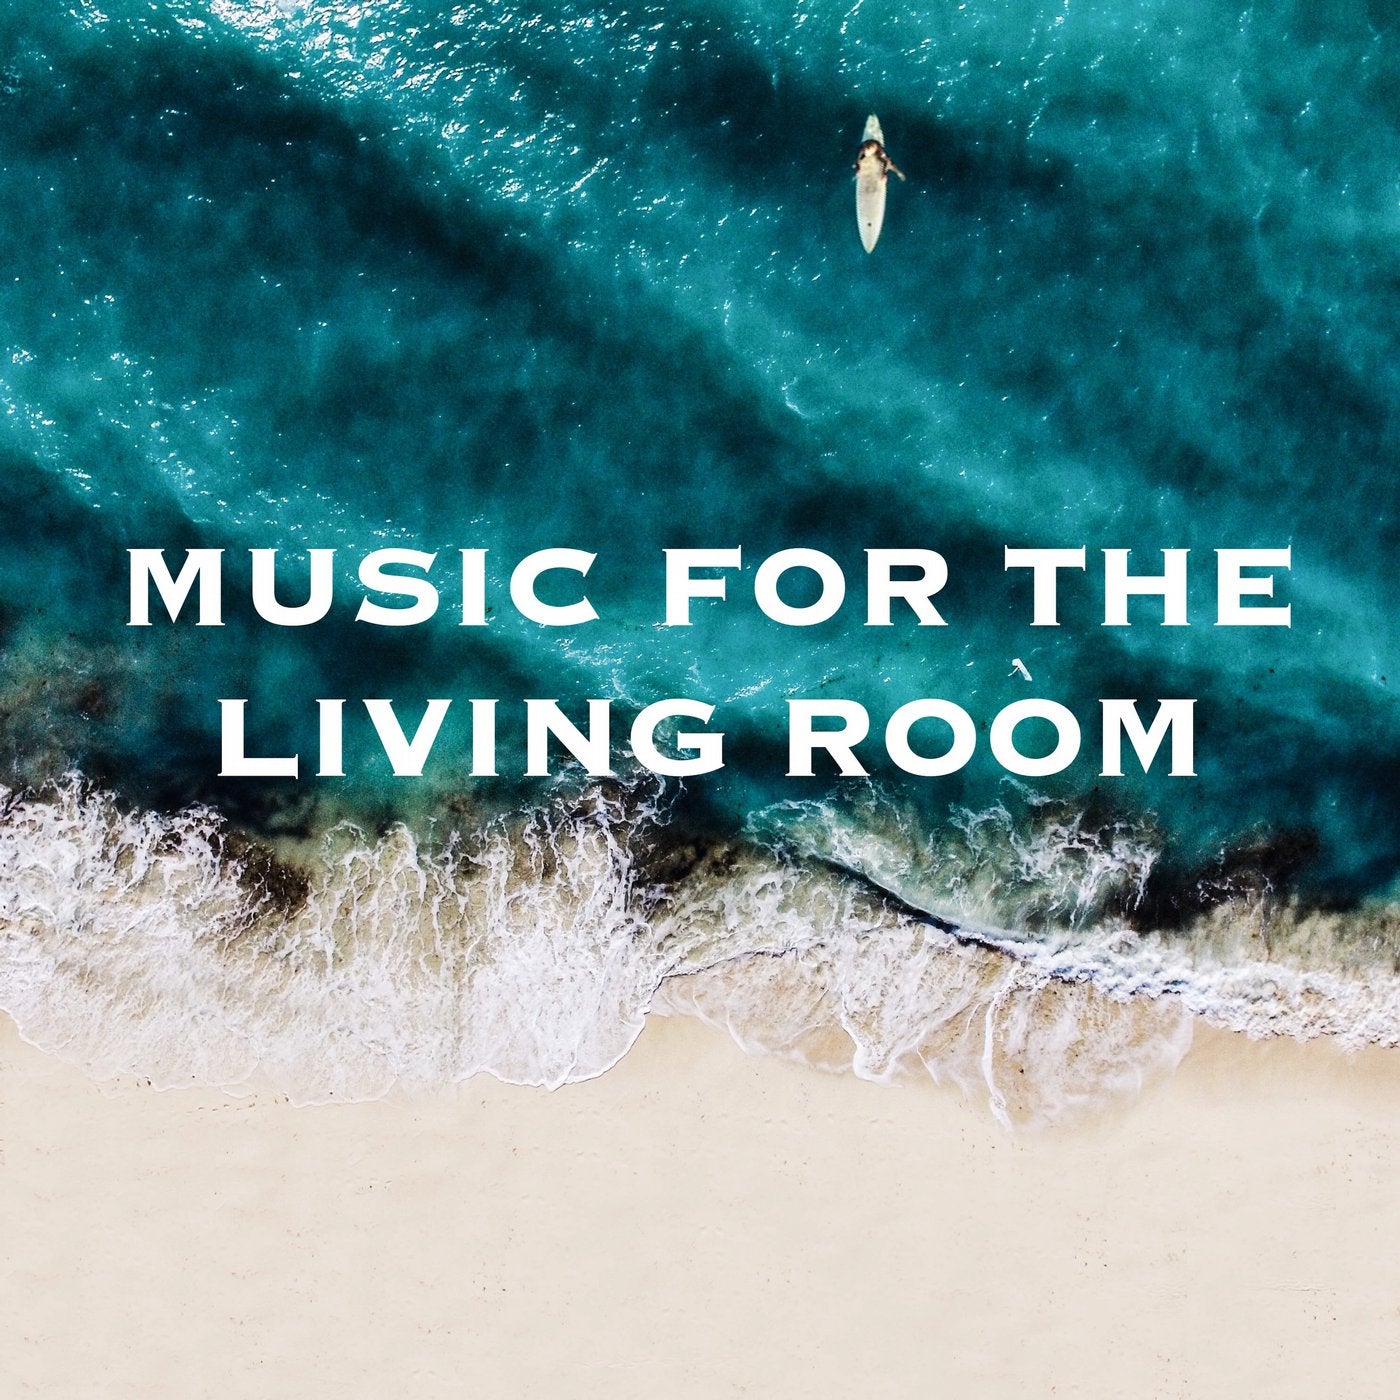 Music for the Living Room